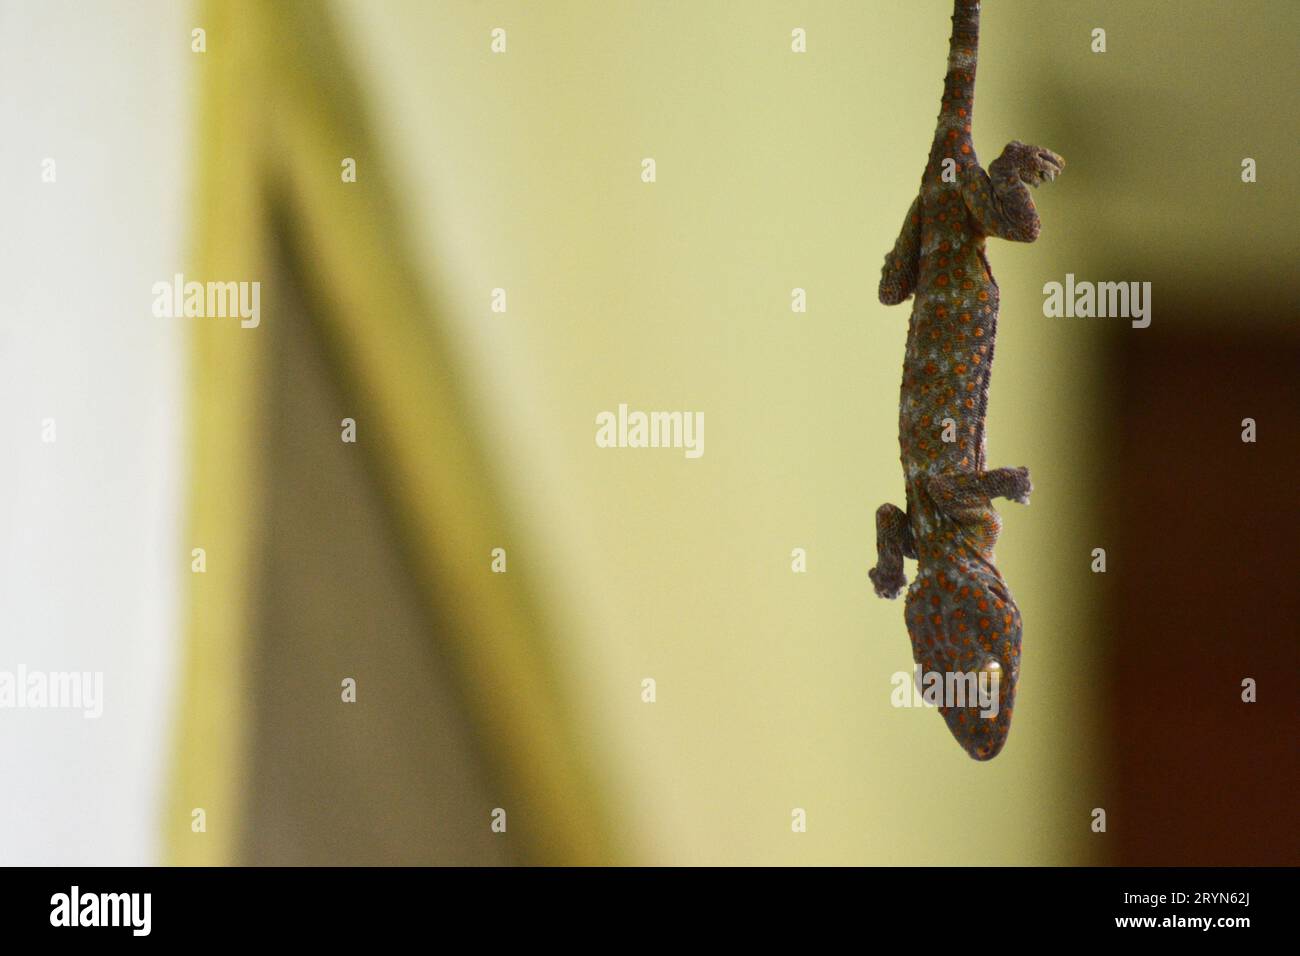 A closeup image of dead lizard, tokay gecko (gekko gecko), hanging on top of the ceiling with blurry background Stock Photo